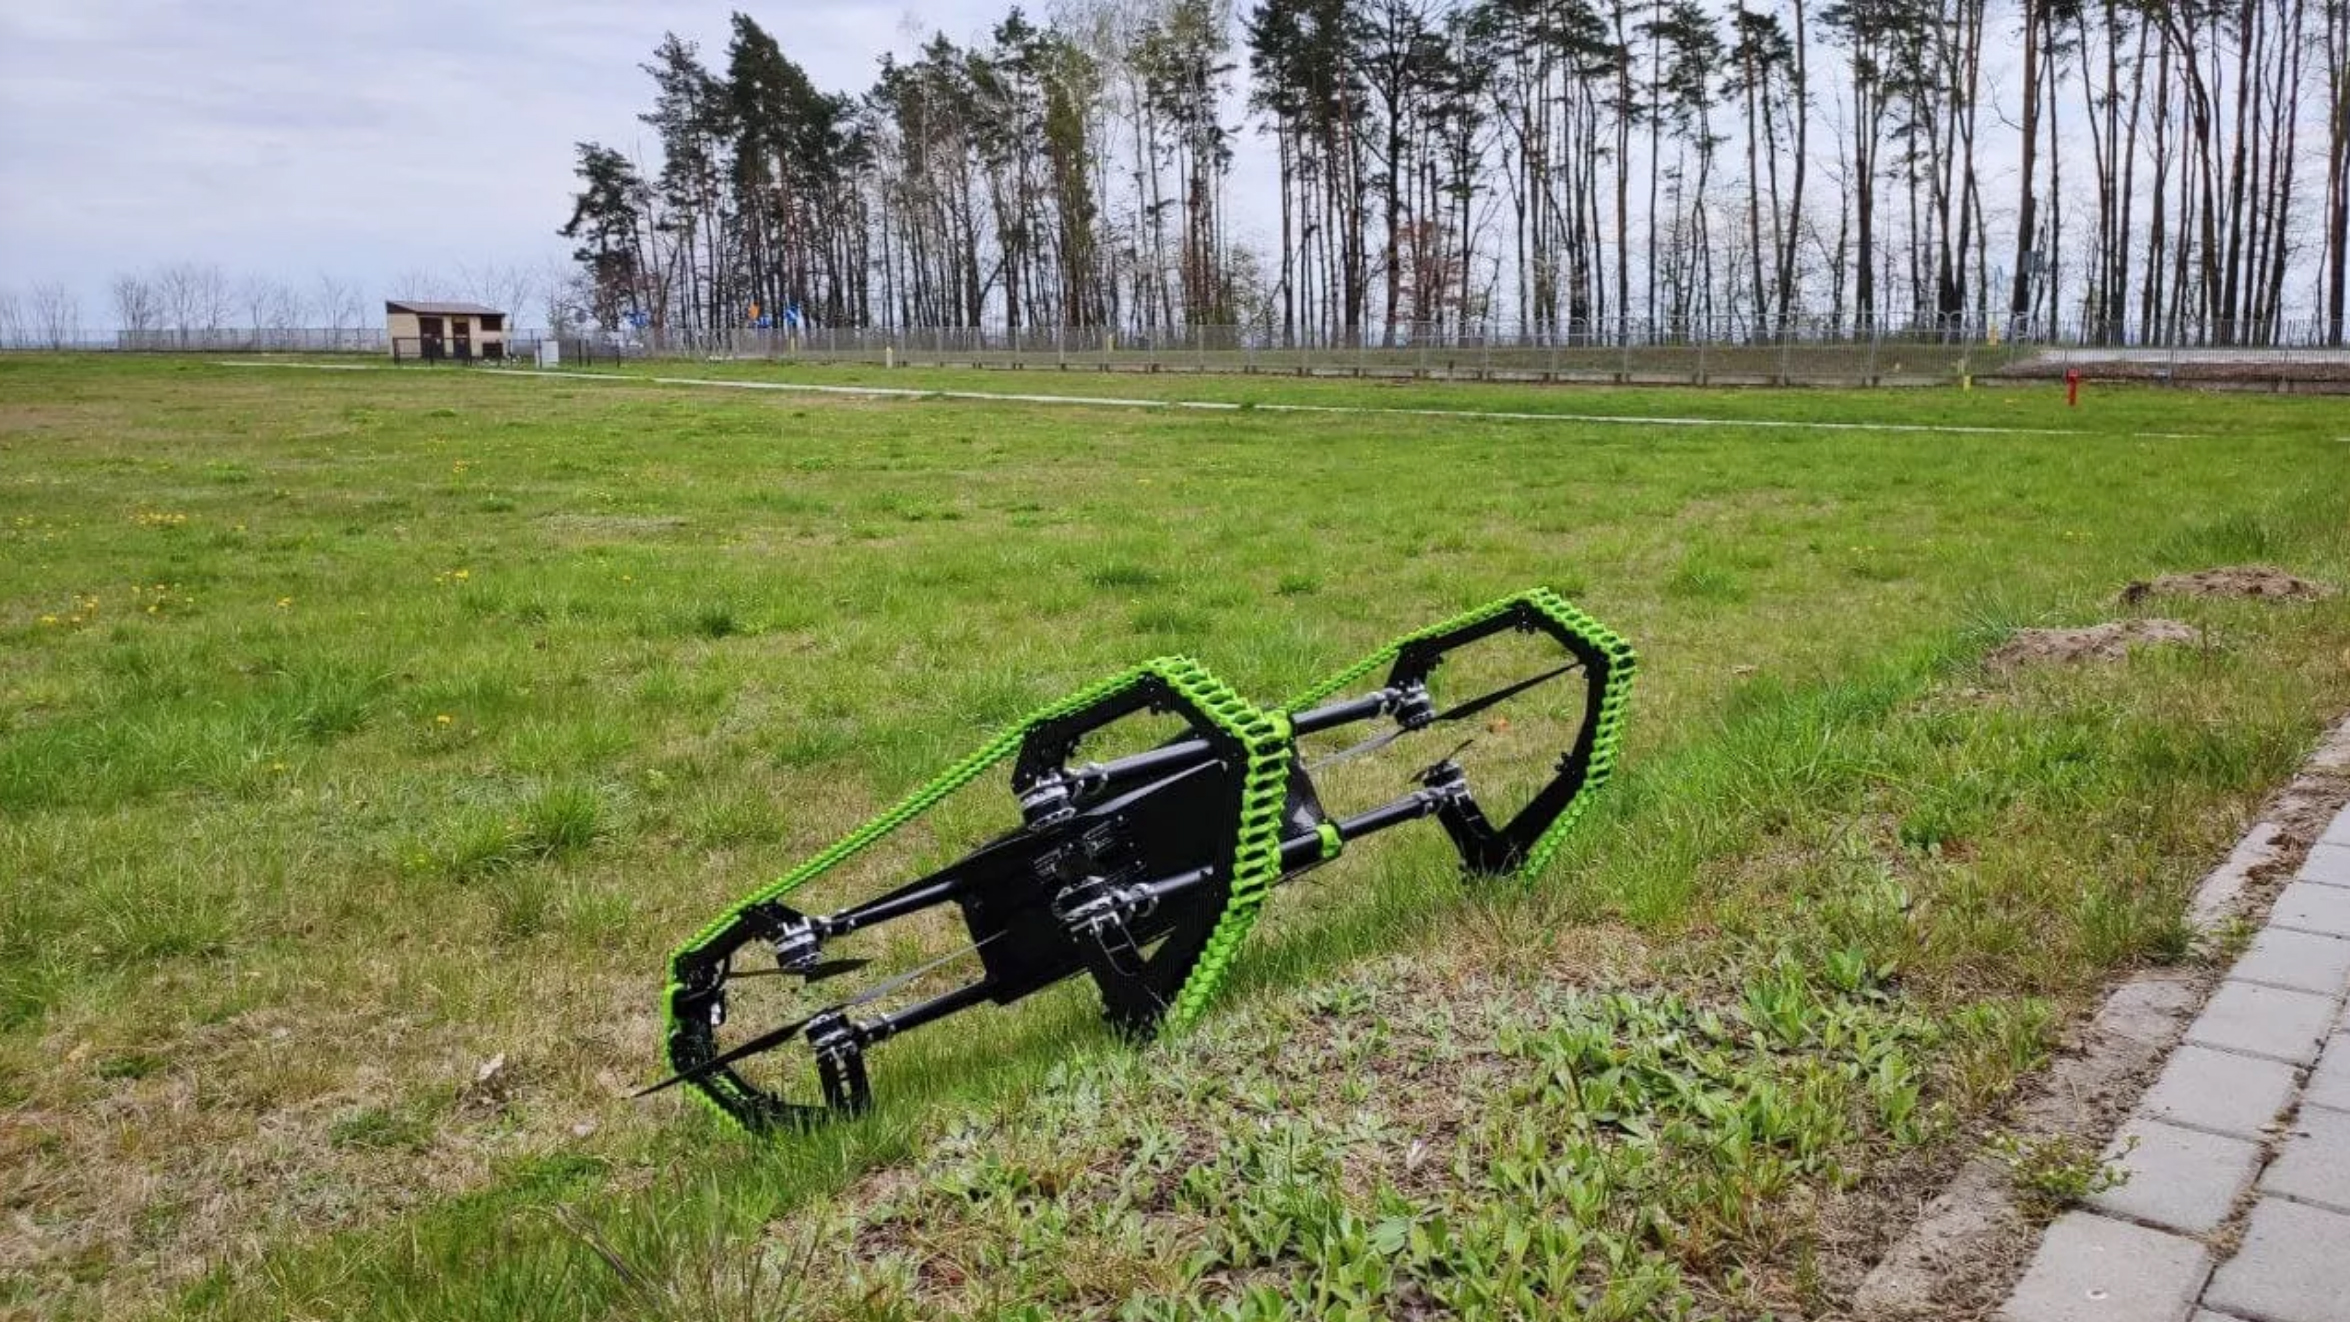 HUUVER – A big step from drones to hybrids